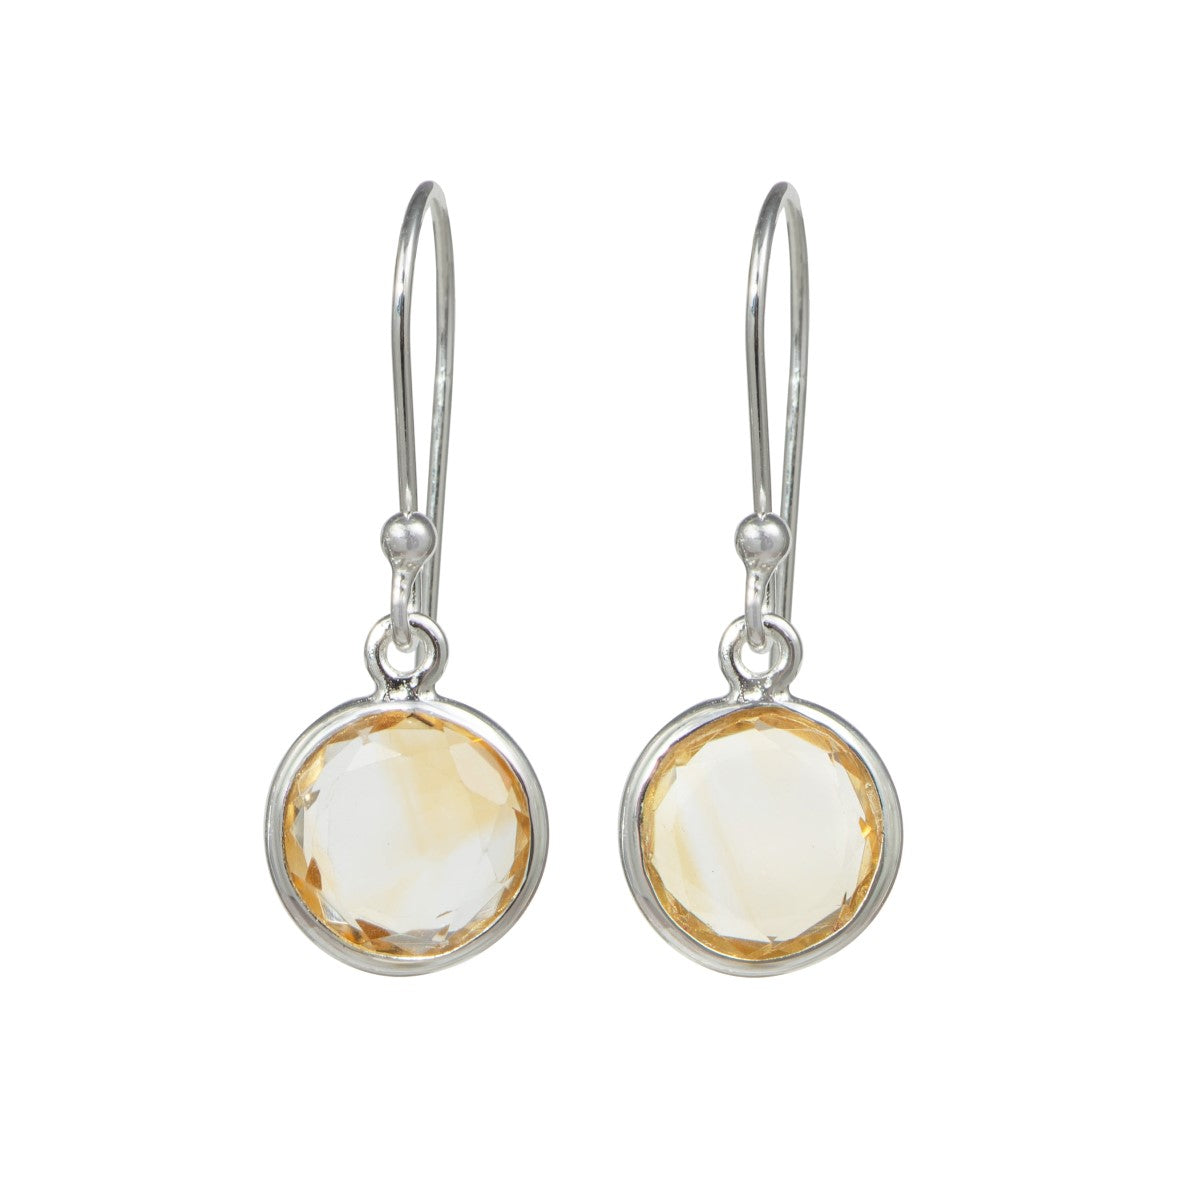 Citrine Sterling Silver Earrings with a Round Faceted Gemstone Drop